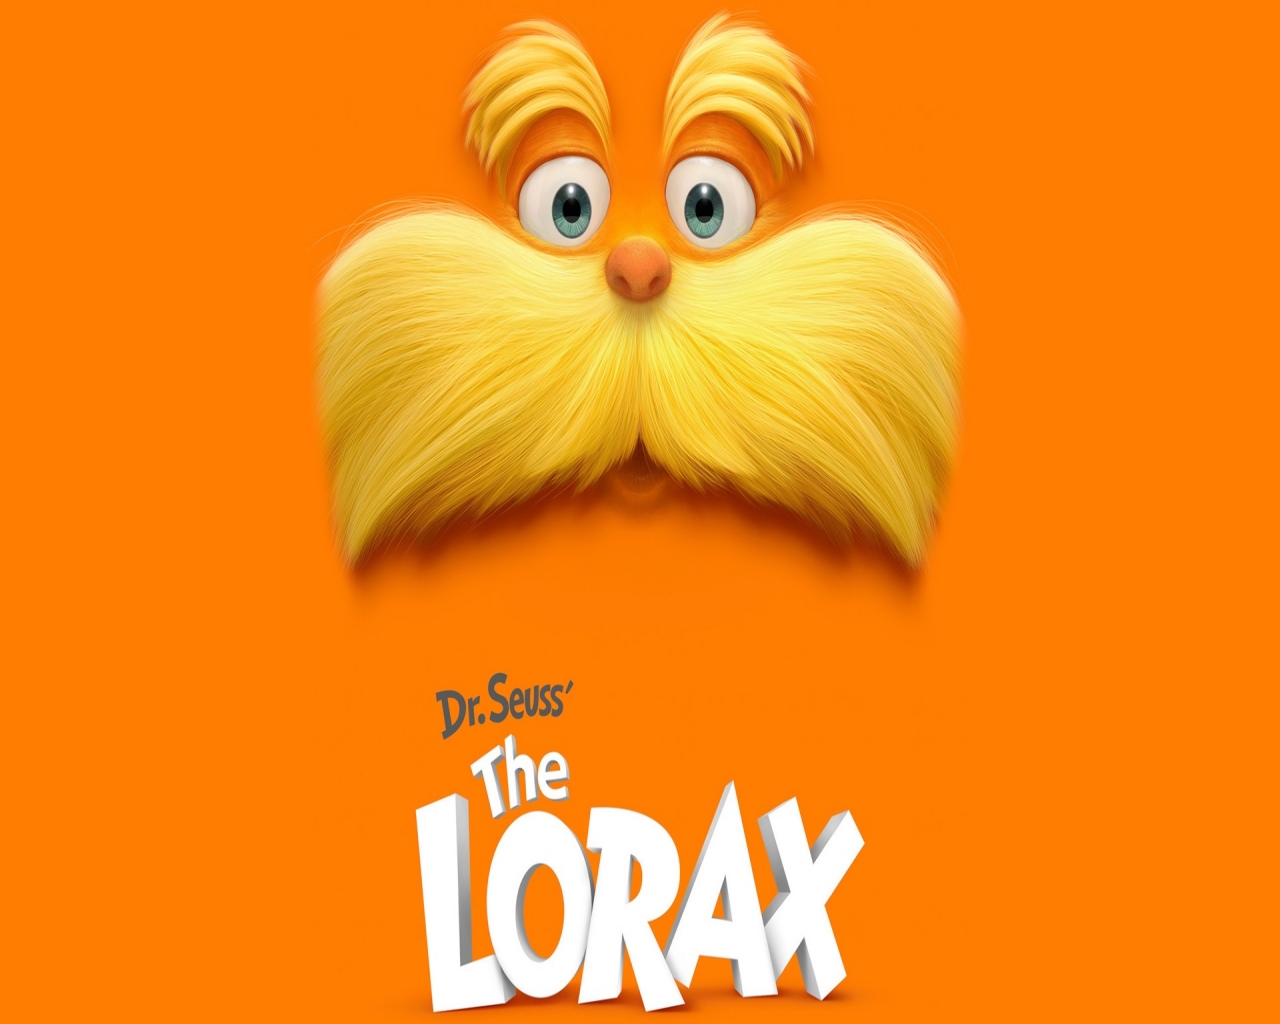 Clip art of Dr Seuss The Lorax poster free image download